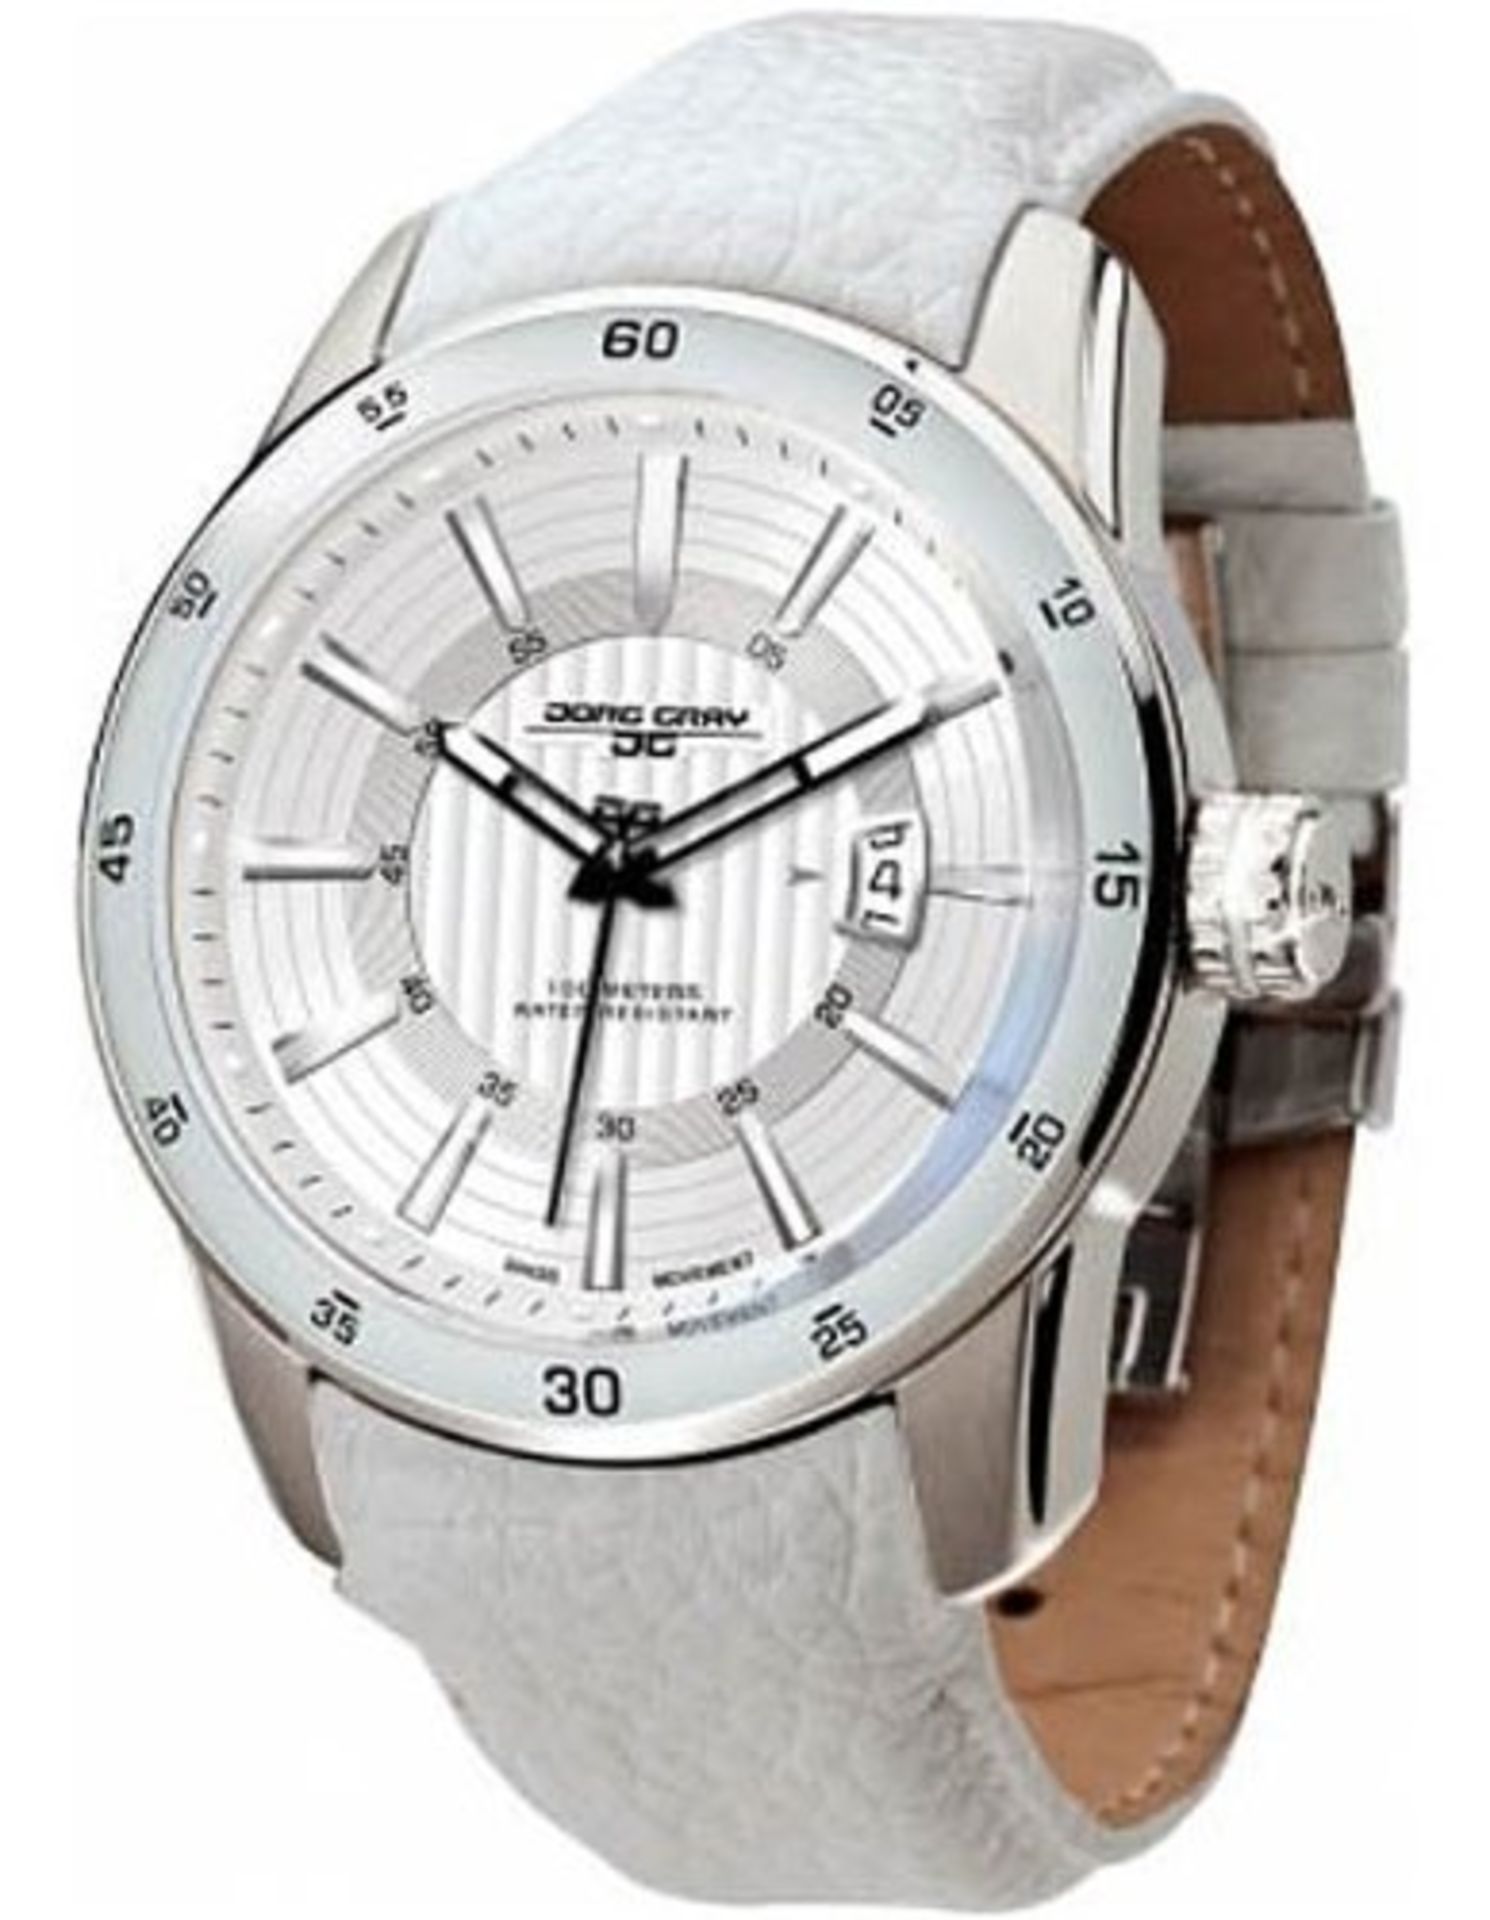 1 x Jorg Gray Men's Analogue Watch JG3700-13 with White Dial and Leather Strap -Online Sale